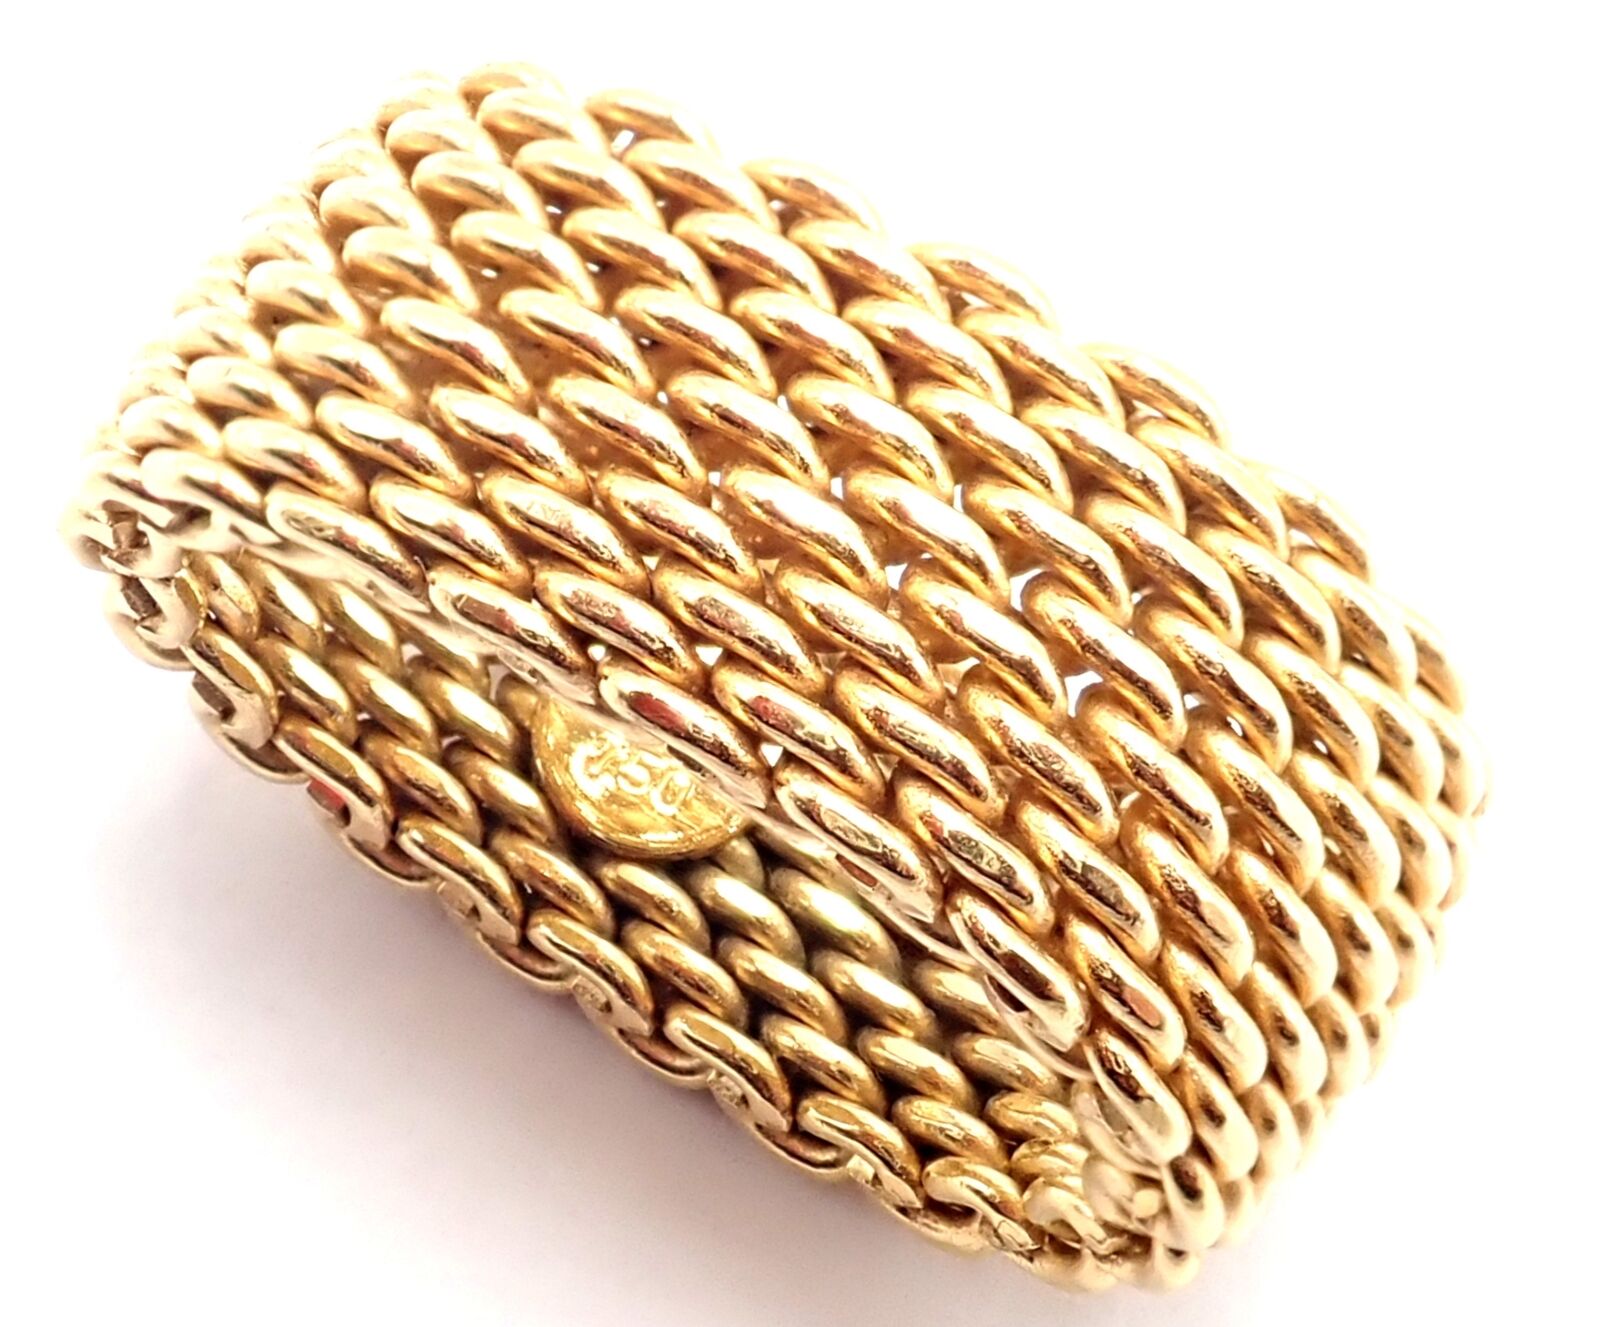 Sold at Auction: Tiffany & Co. Somerset 18k Gold Heart Mesh Ring